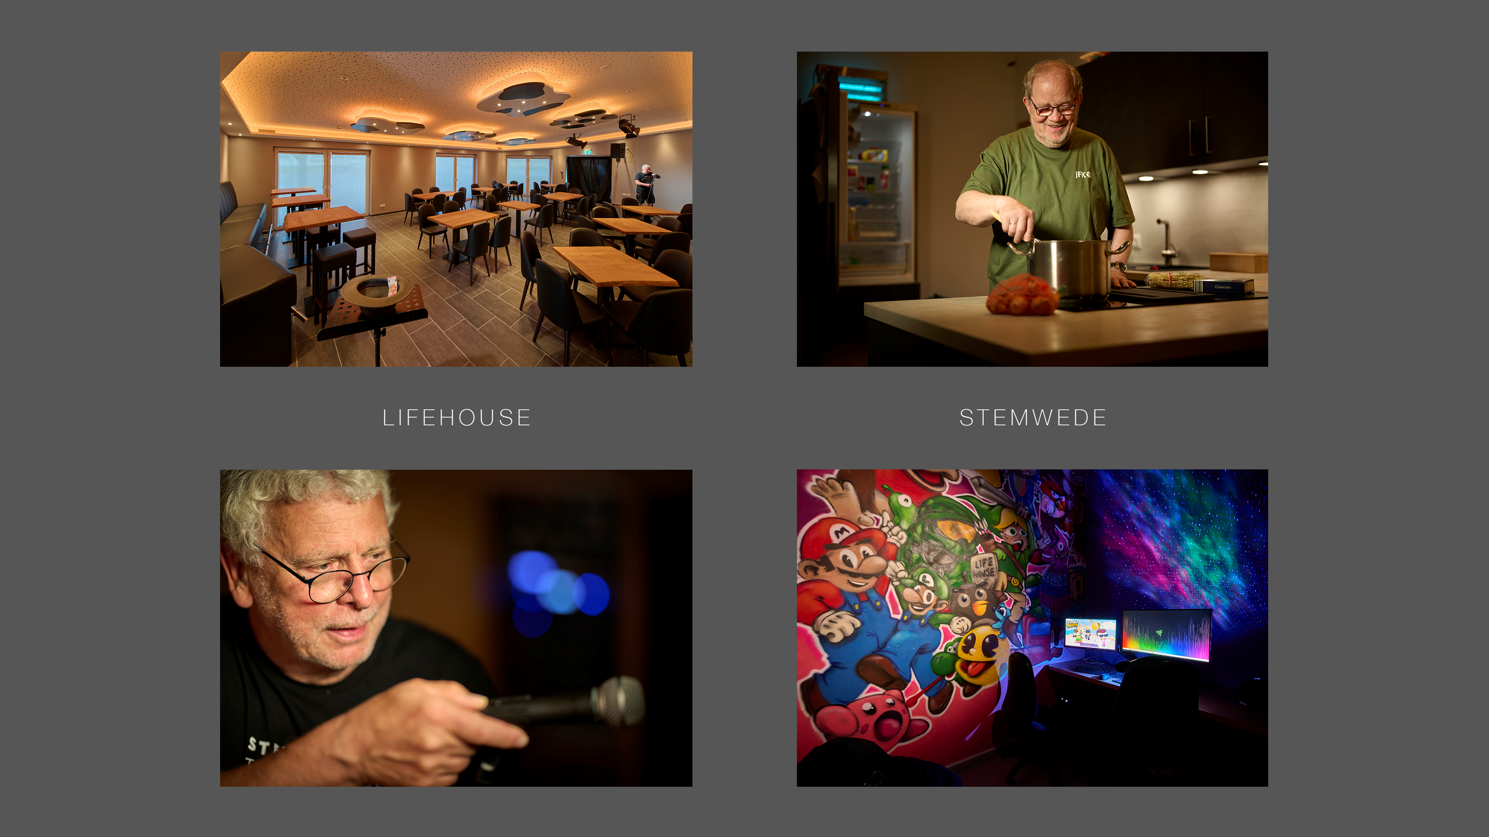 Collage Dritter Ort: Lifehouse Stemwede